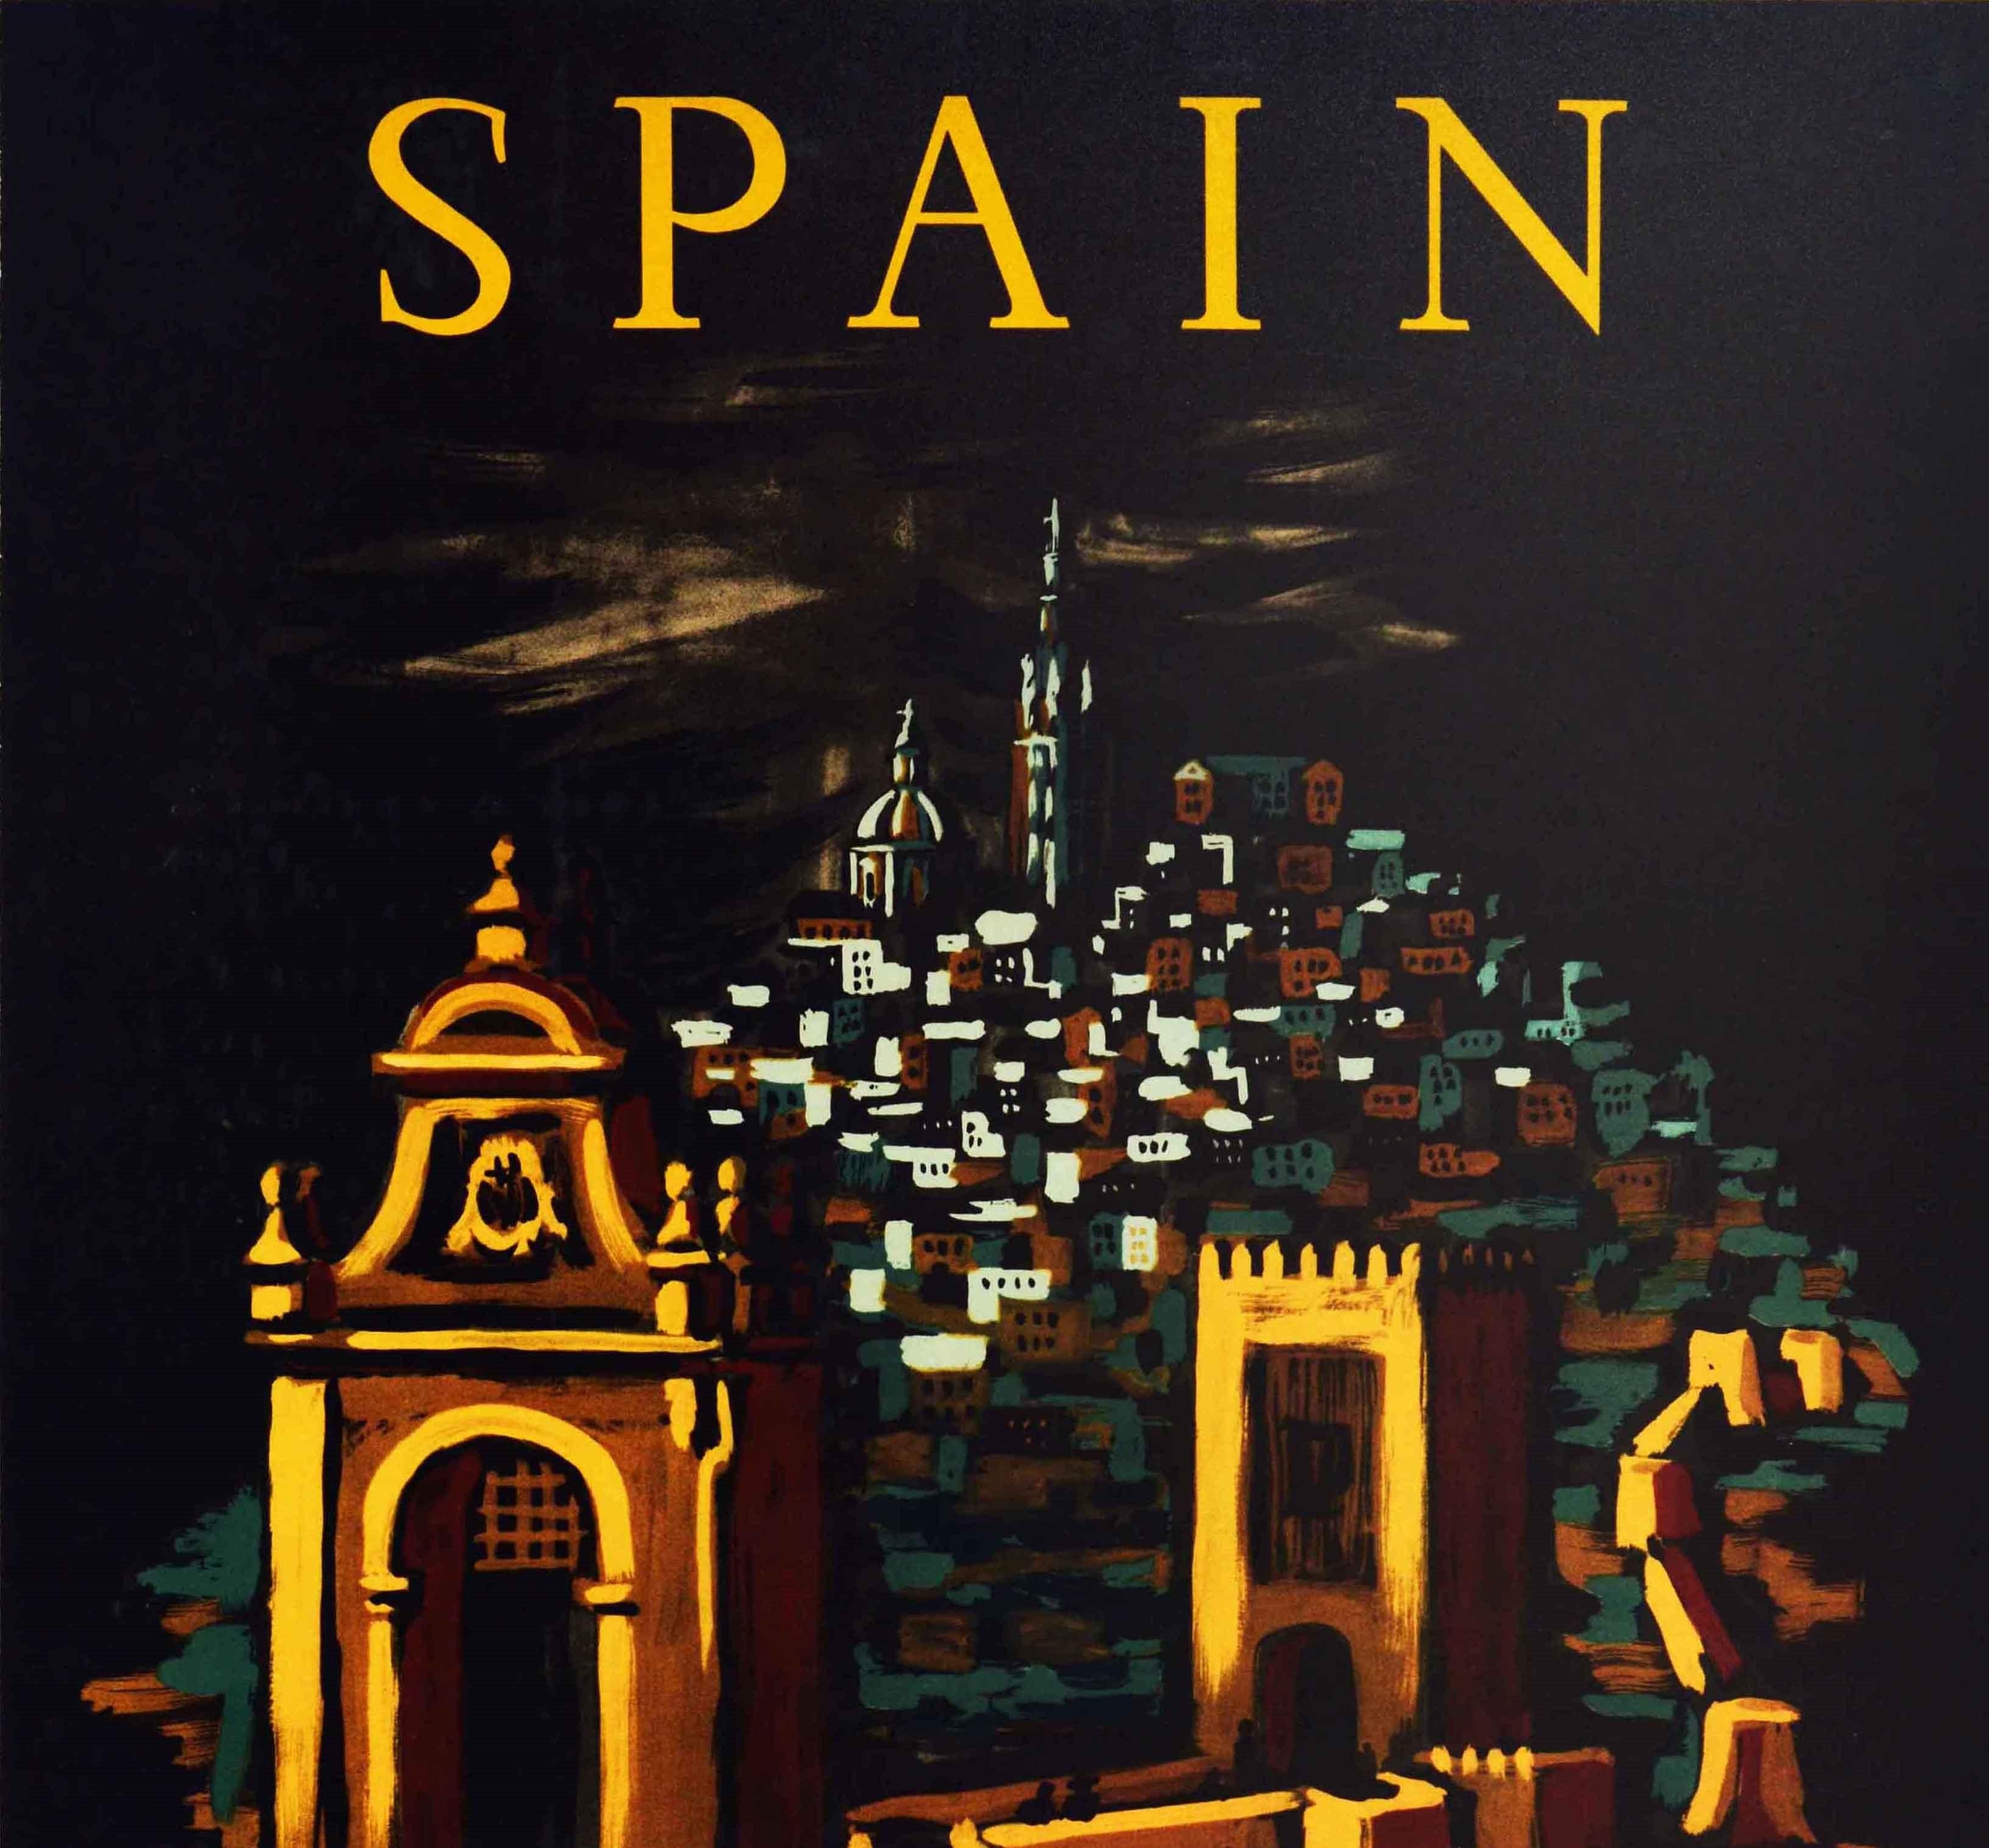 Spanish Original Vintage Travel Poster For Spain Ft. Walled City Gate Night View Artwork